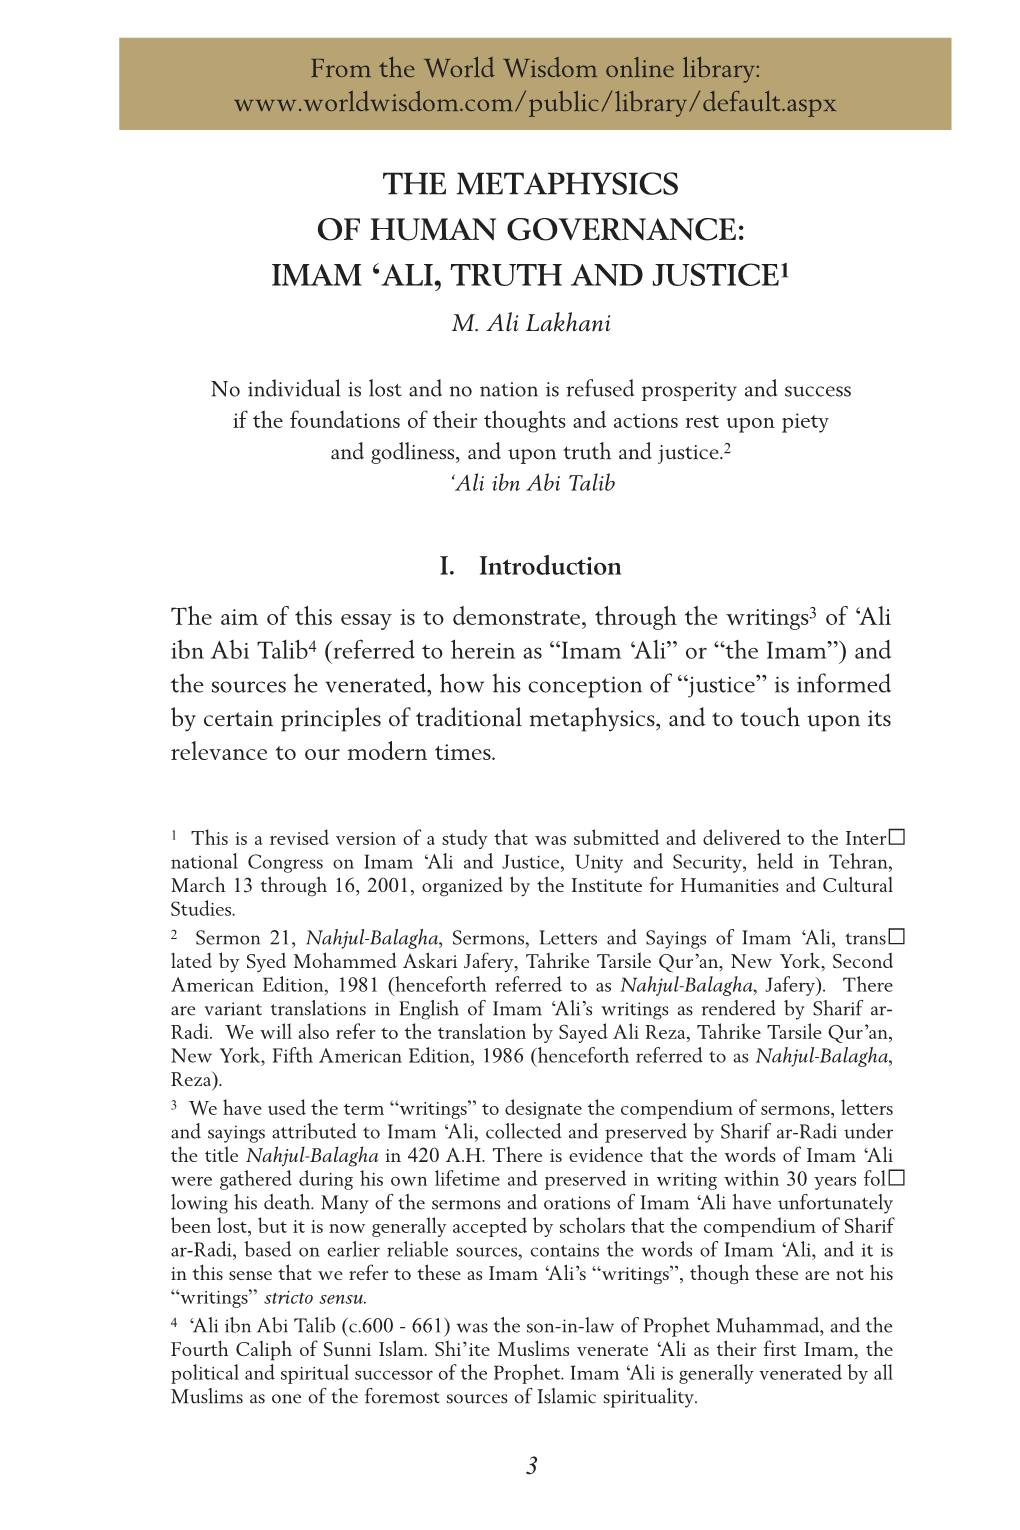 "The Metaphysics of Human Governance: Imam 'Ali, Truth And